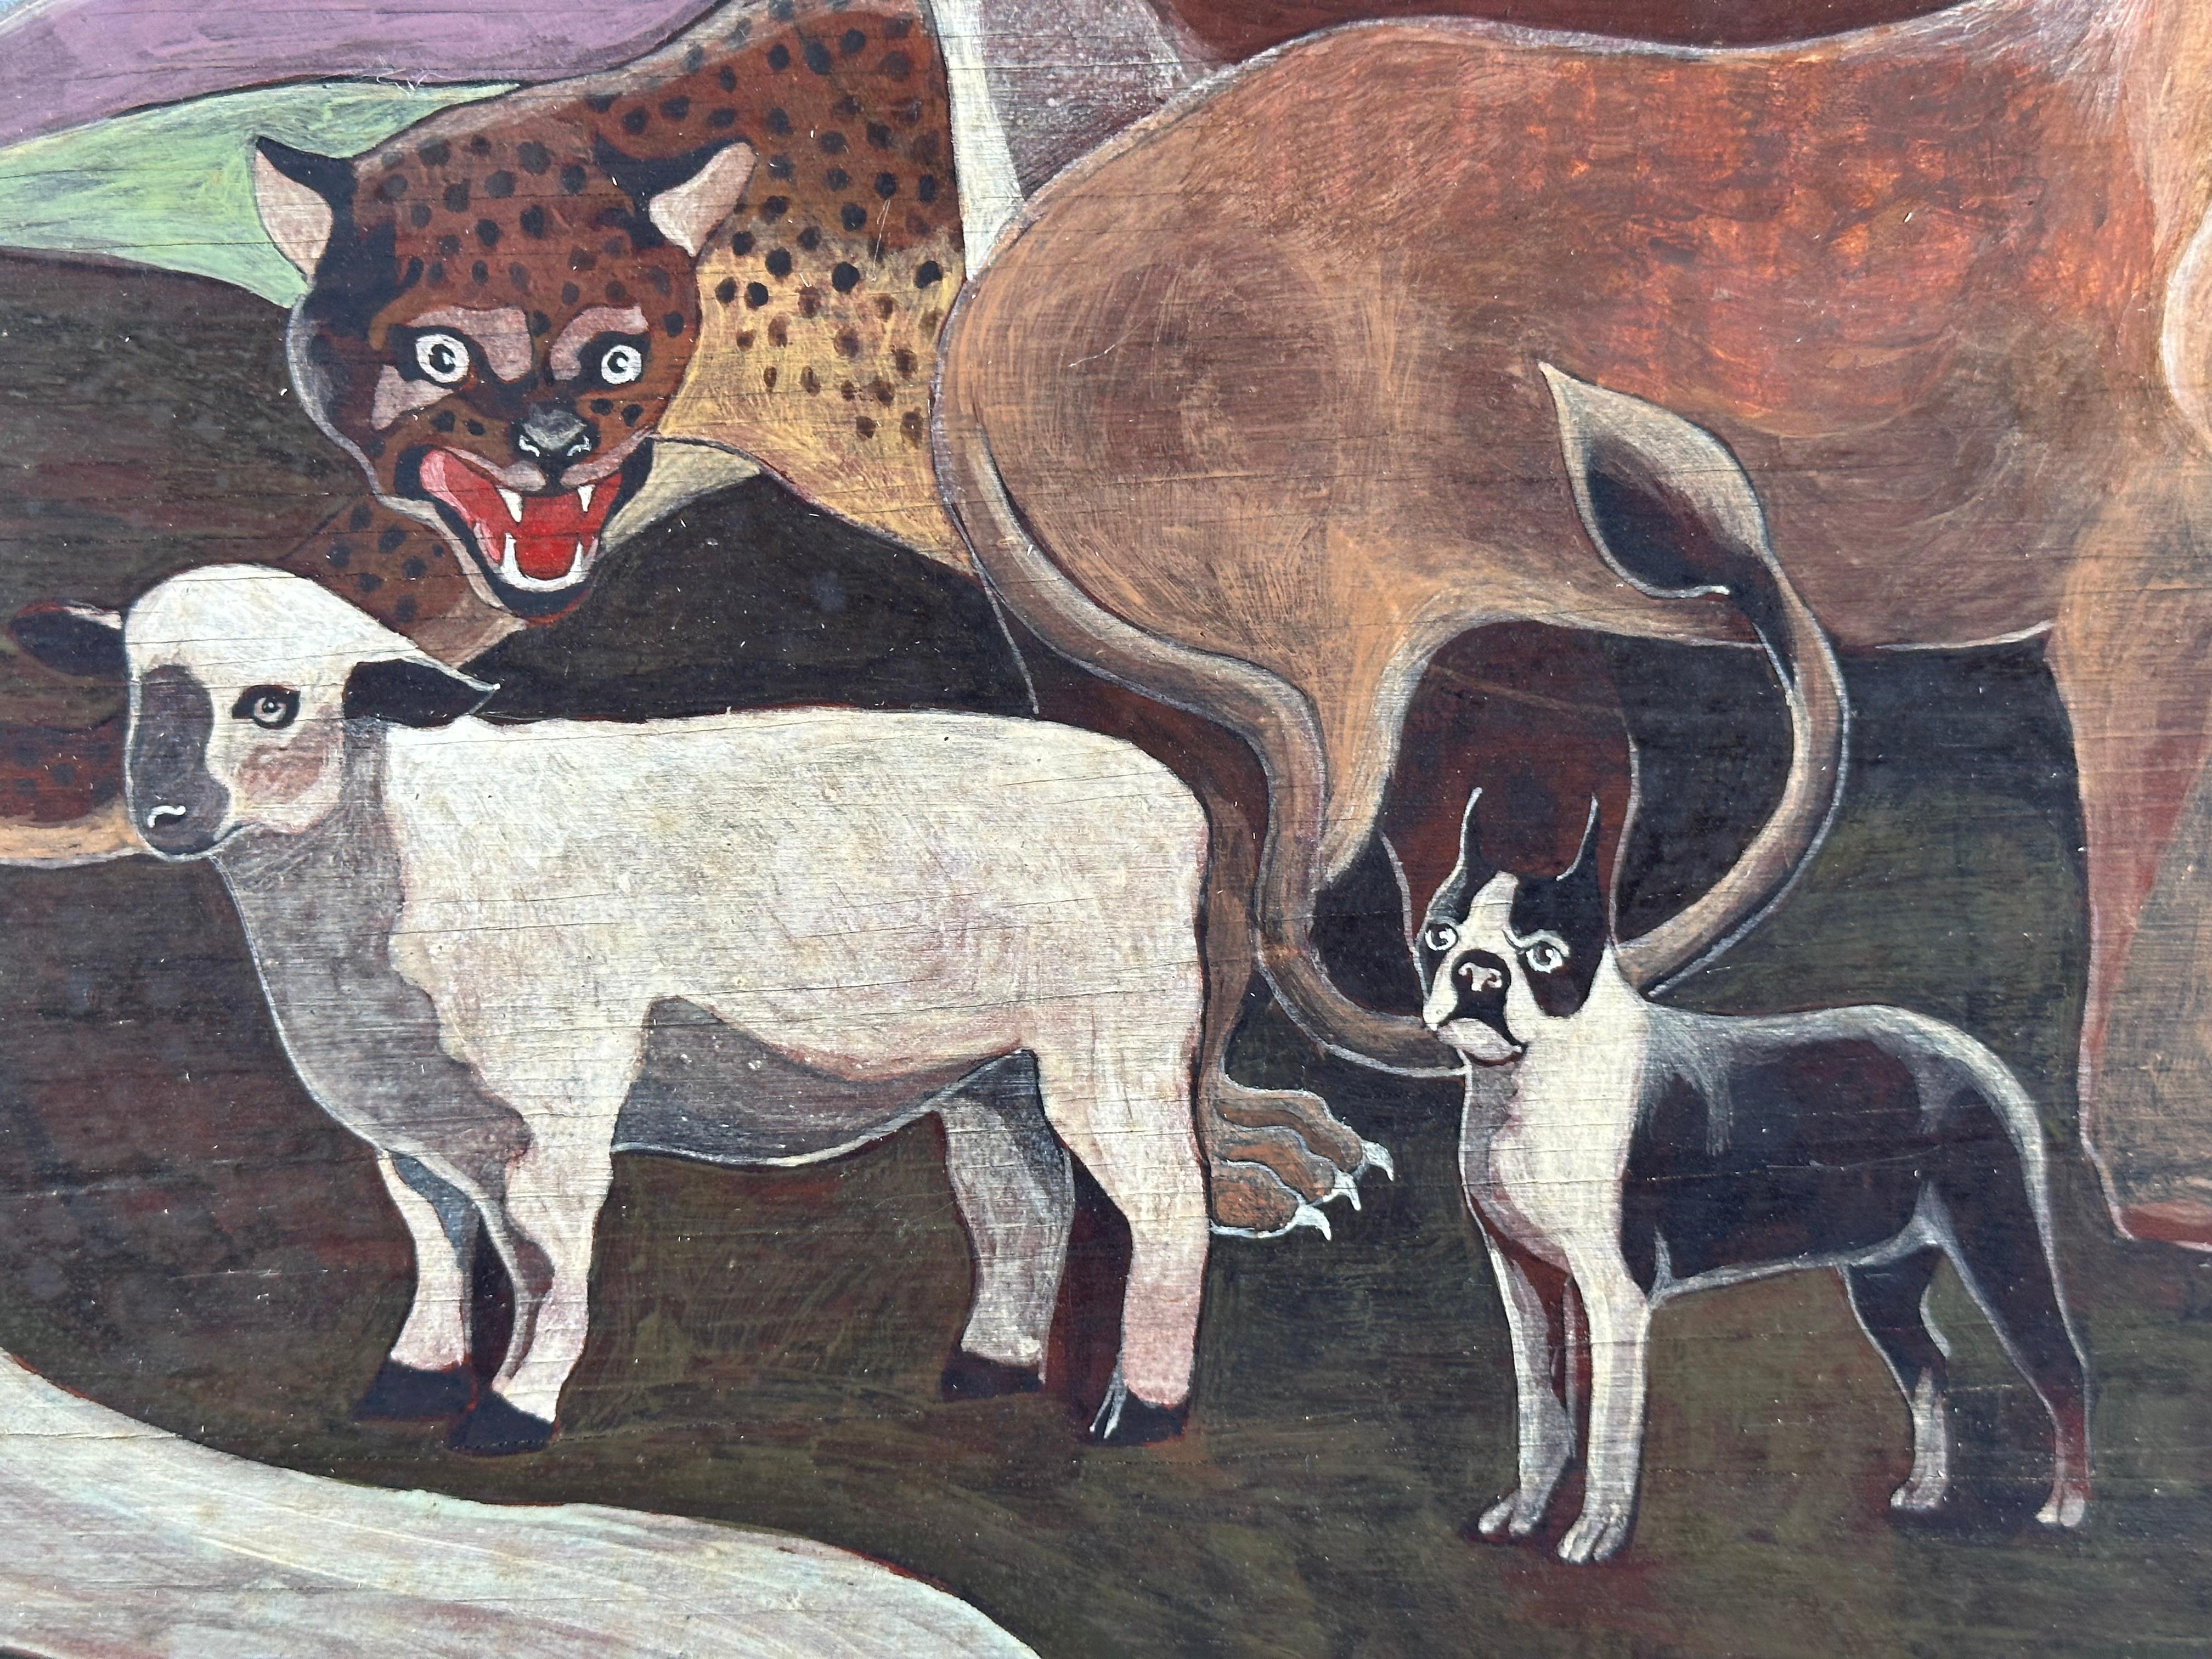 Peaceable Kingdom with Boston Terrier surrealist painting - Painting by Unknown